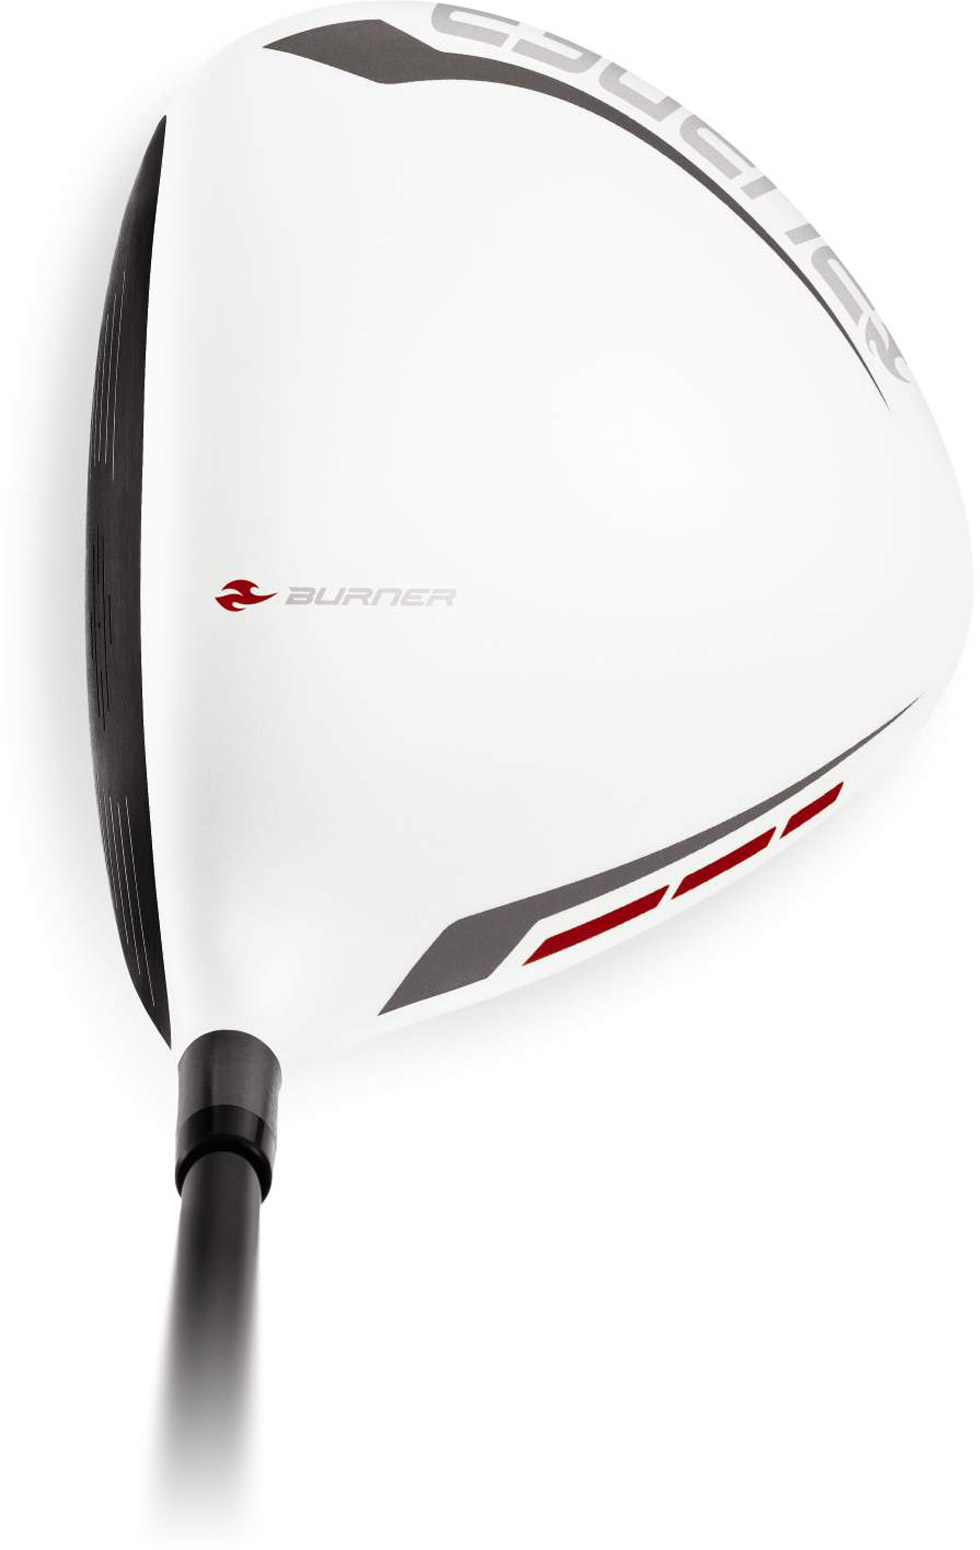 TaylorMade Announces R11 Drivers, Burner SuperFast 2.0 Drivers